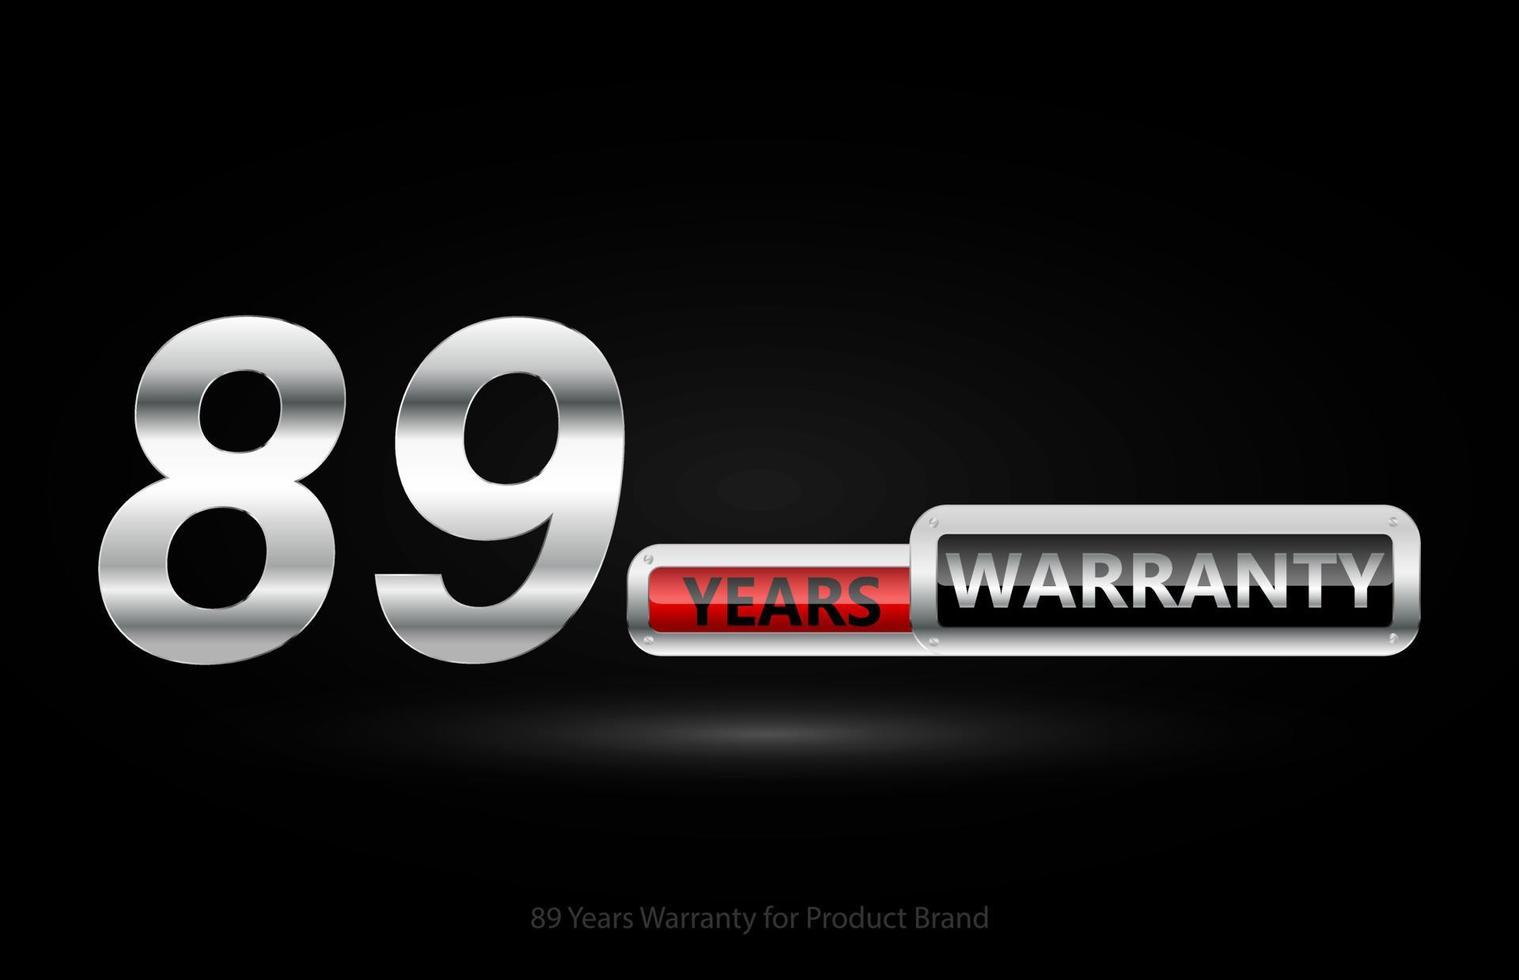 89 years warranty silver logo isolated on black background, vector design for product warranty, guarantee, service, corporate, and your business.